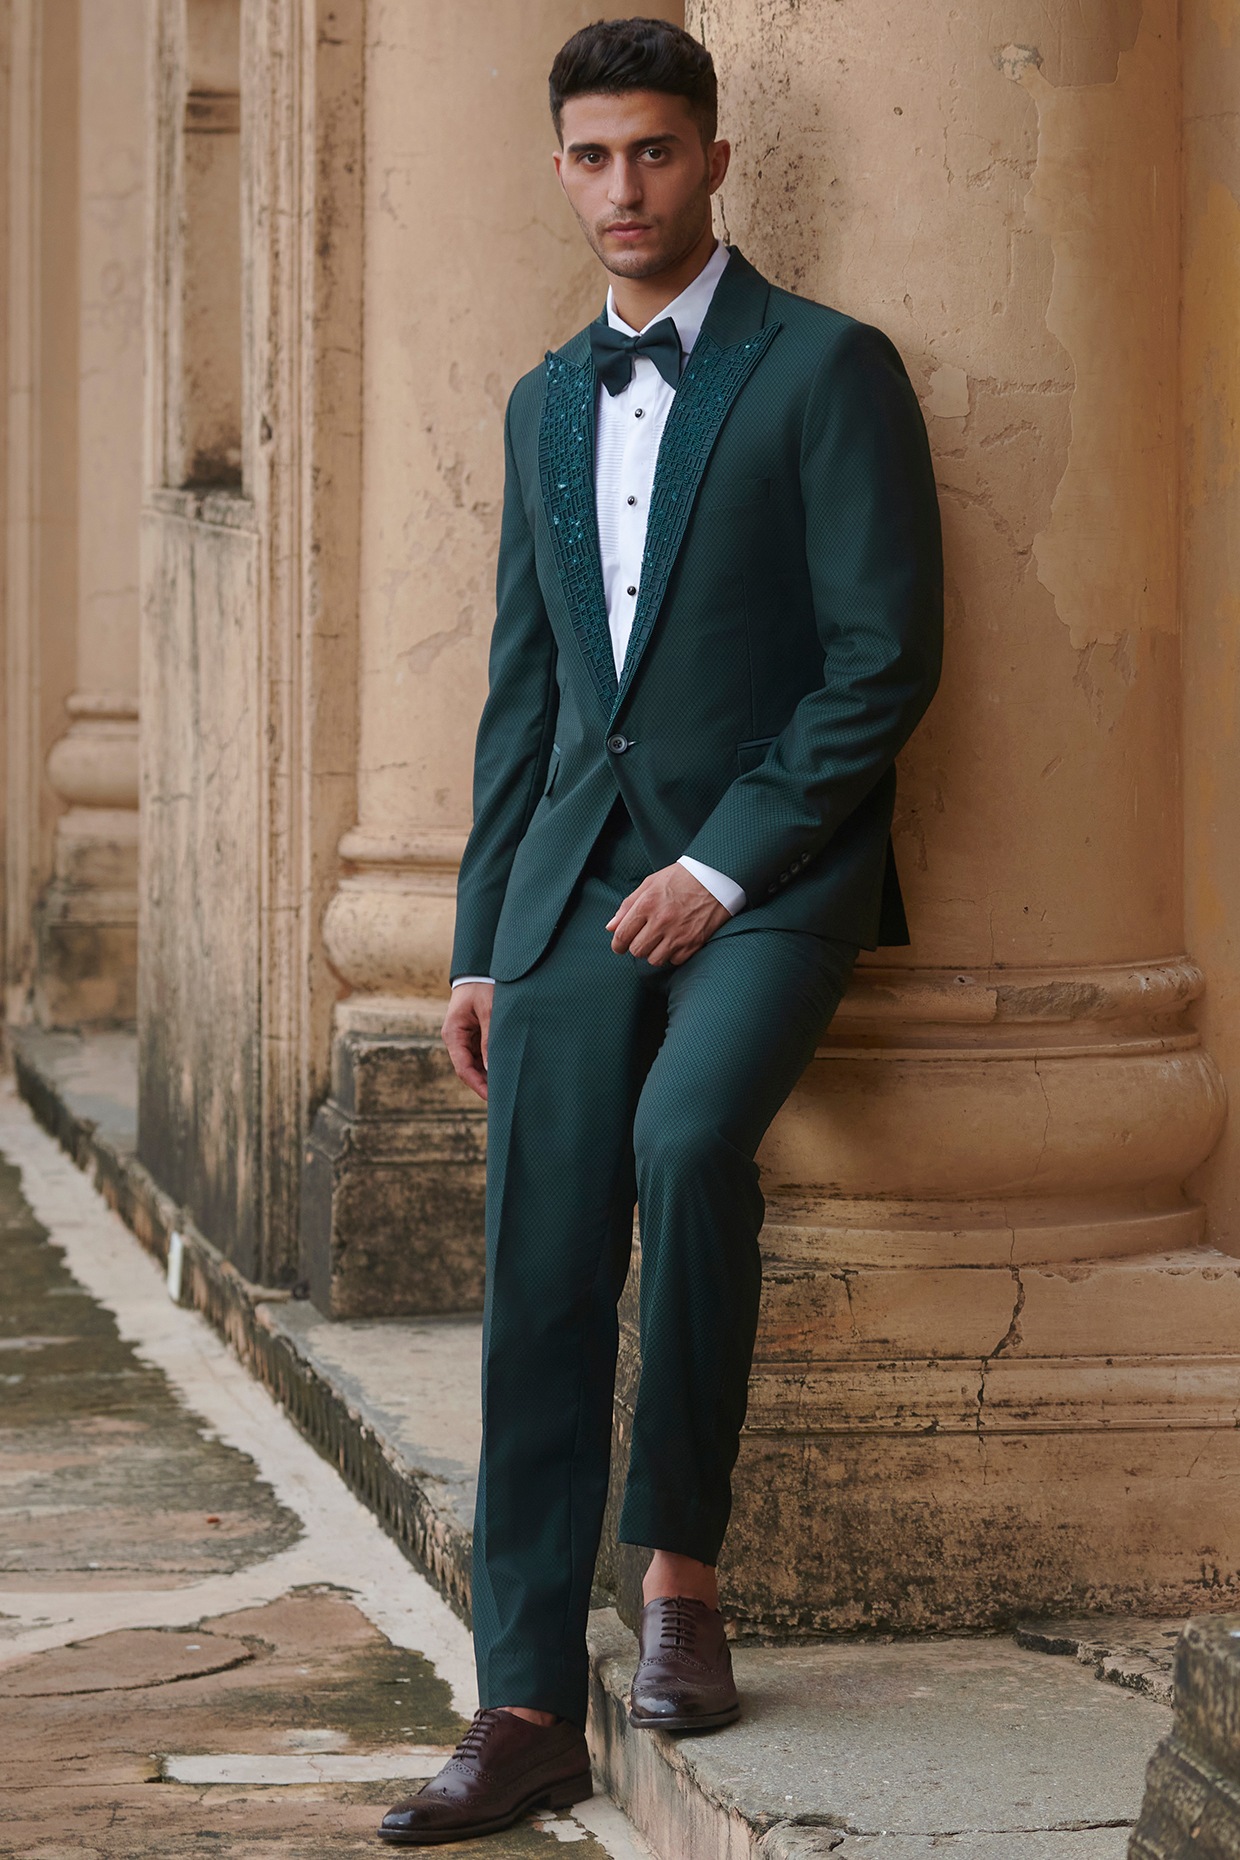 Buy Green Suit for Men, 3 Piece Suit for Groom and Groomsmen, Bespoke Suit  for Prom, Dinner, Office Wear, Party Wear, Wedding. Online in India - Etsy